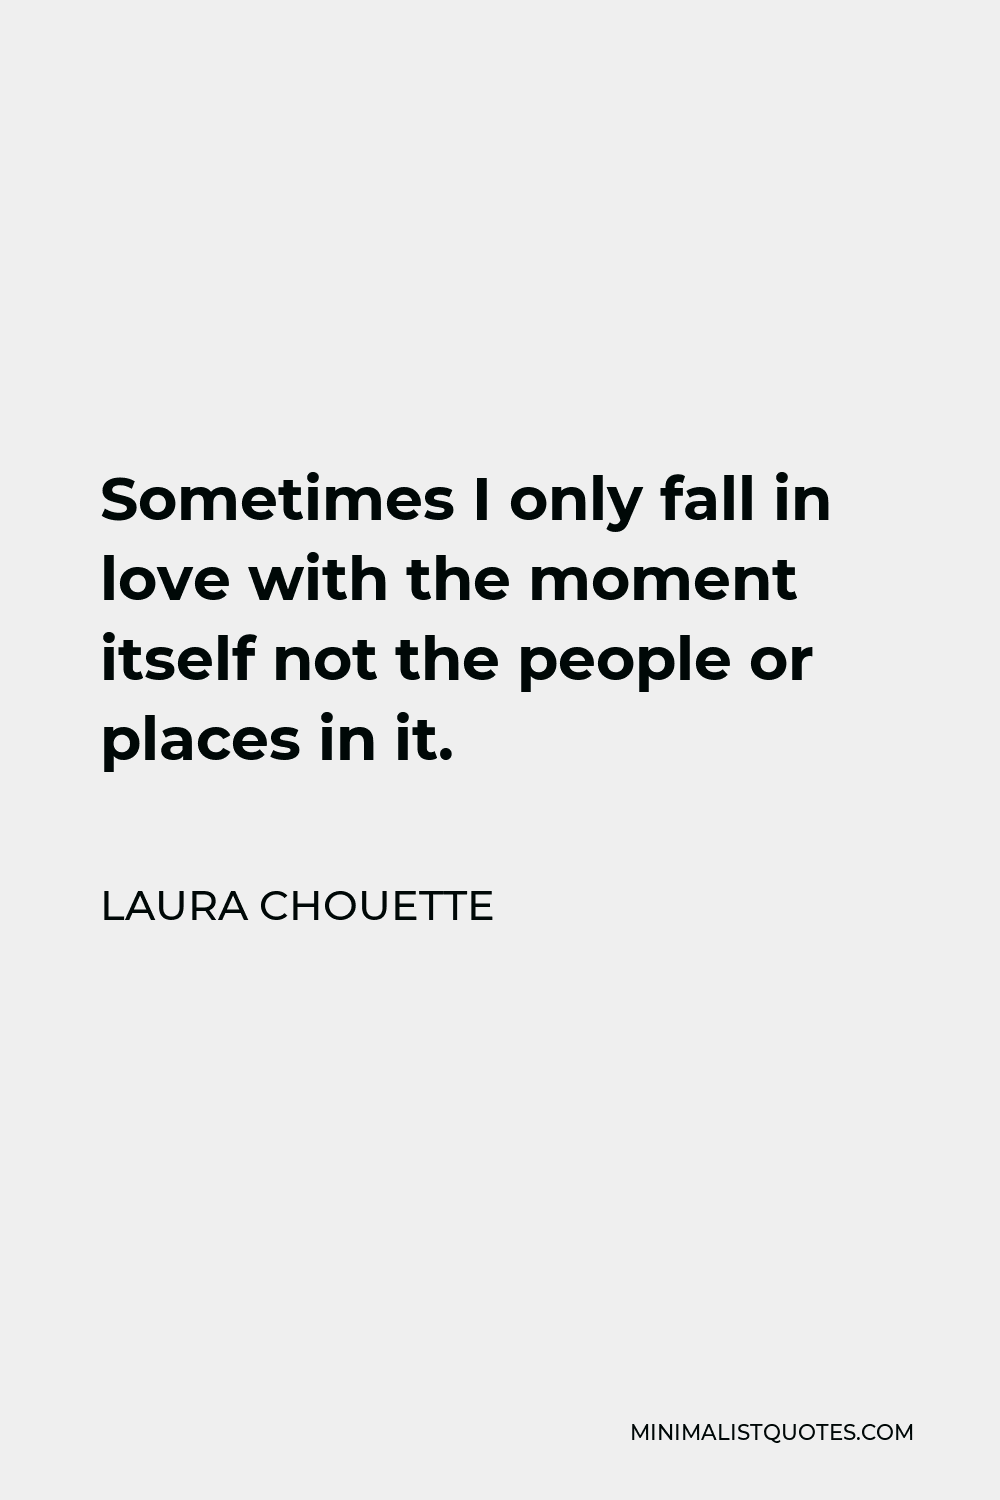 Laura Chouette Quote - Sometimes I only fall in love with the moment itself not the people or places in it.